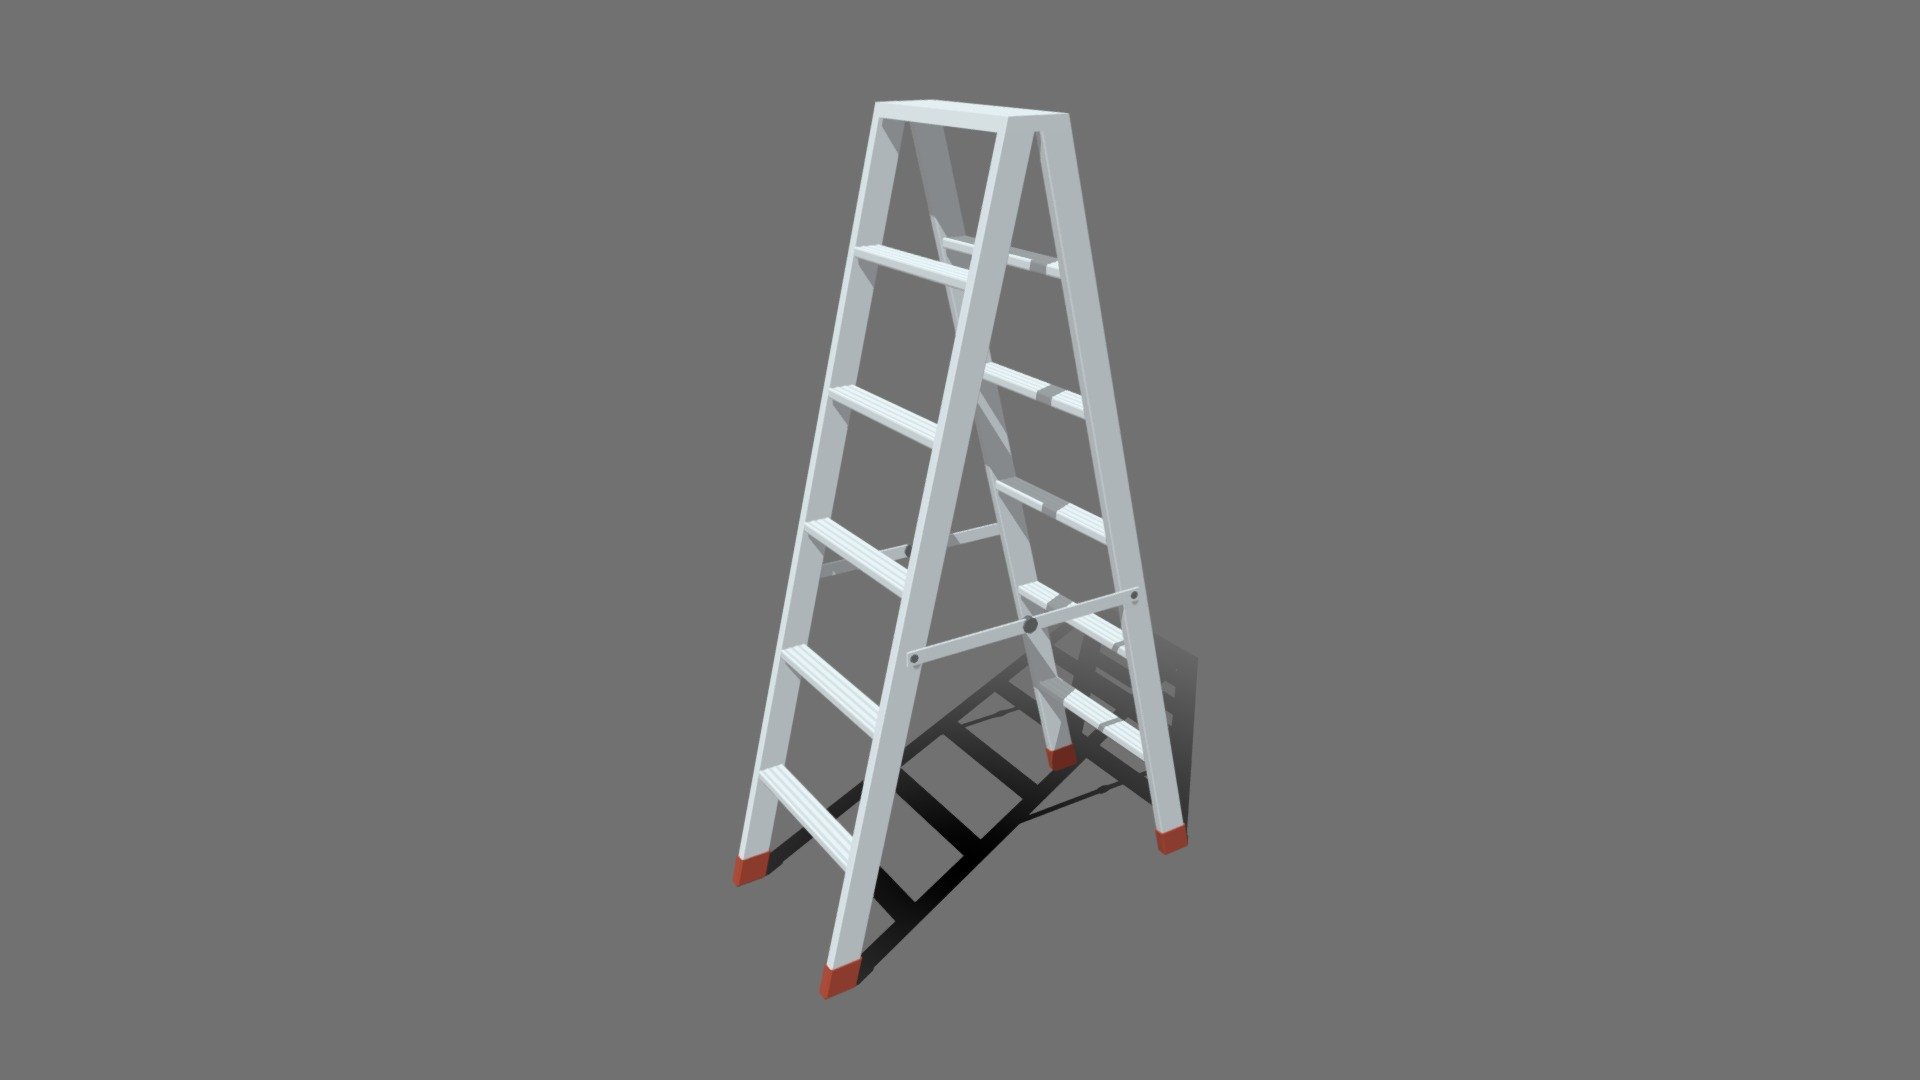 This is a low poly 3D model of an aluminium ladder. The low poly ladder was modeled and prepared for low-poly style renderings, background, general CG visualization presented as 1 mesh with quads/tris.

Verts : 1.484 Faces : 1.460.

The 3D model have simple materials with diffuse colors.

No ring, maps and no UVW mapping is available.

The original file was created in blender. You will receive a 3DS, OBJ, FBX, blend, DAE, Stl, gLTF.

All preview images were rendered with Blender Cycles. Product is ready to render out-of-the-box. Please note that the lights, cameras, and background is only included in the .blend file. The model is clean and alone in the other provided files, centred at origin and has real-world scale 3d model